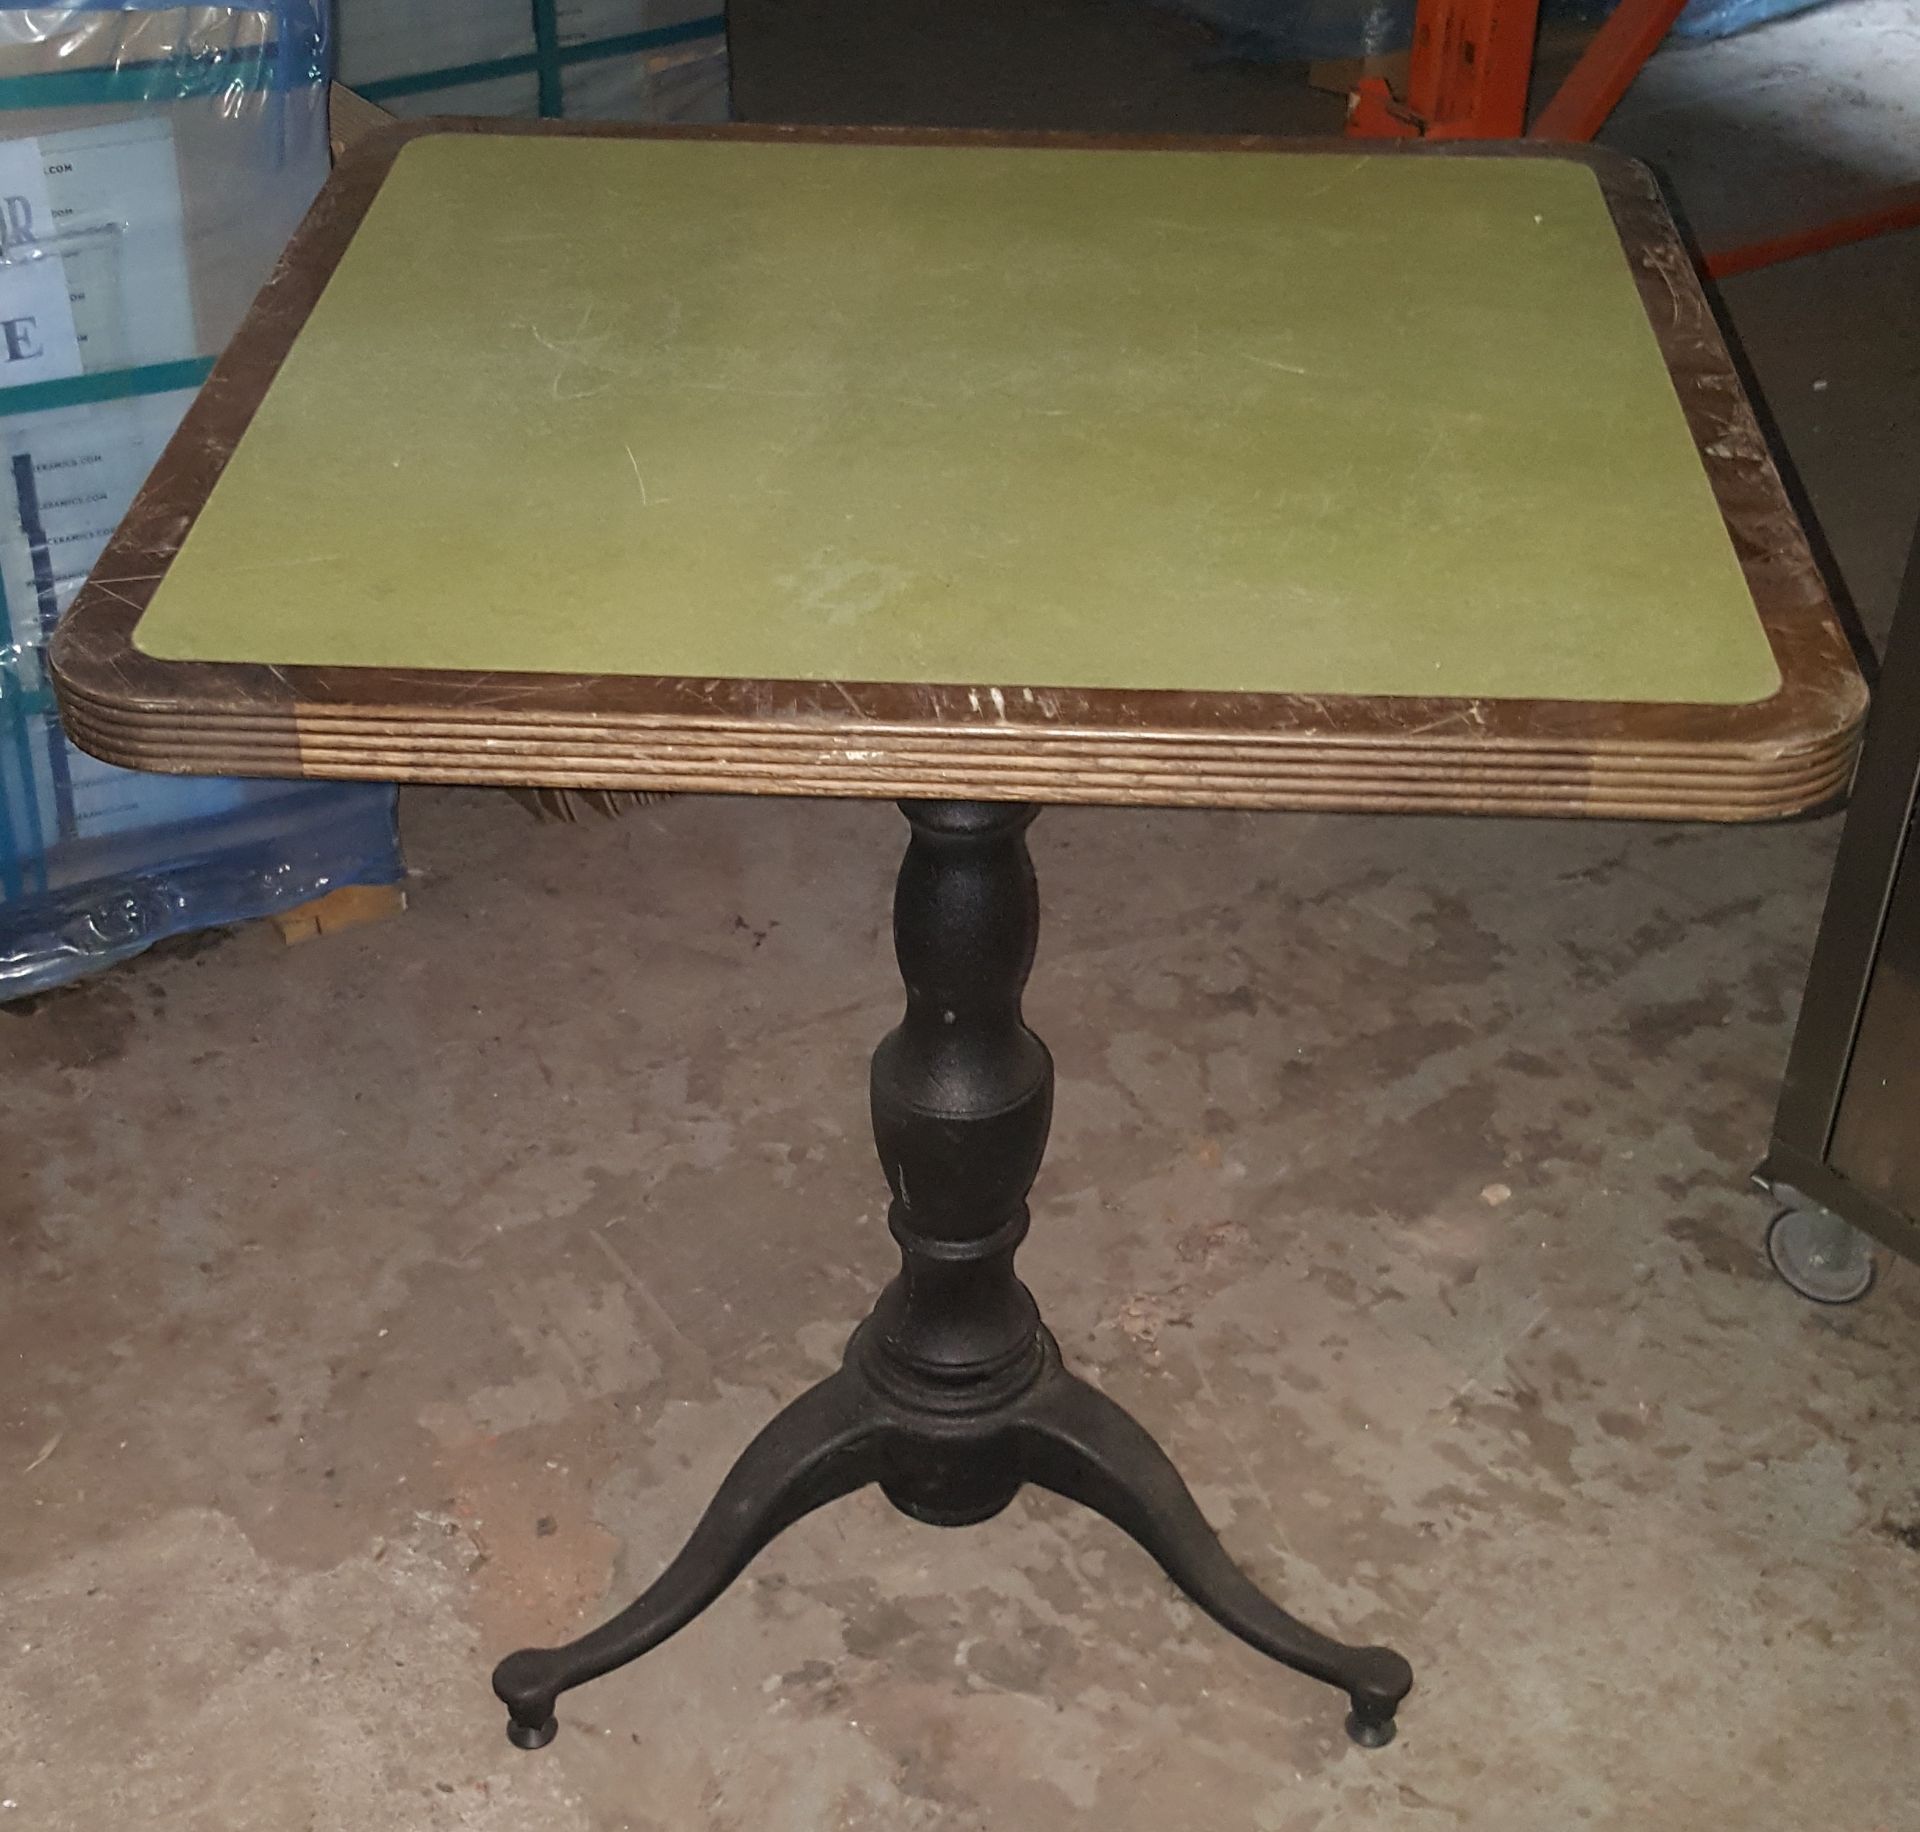 3 x Assorted Bistro Restaurant Tables With Green Faux Leather Inserts And Three-Legged Base - Image 2 of 9